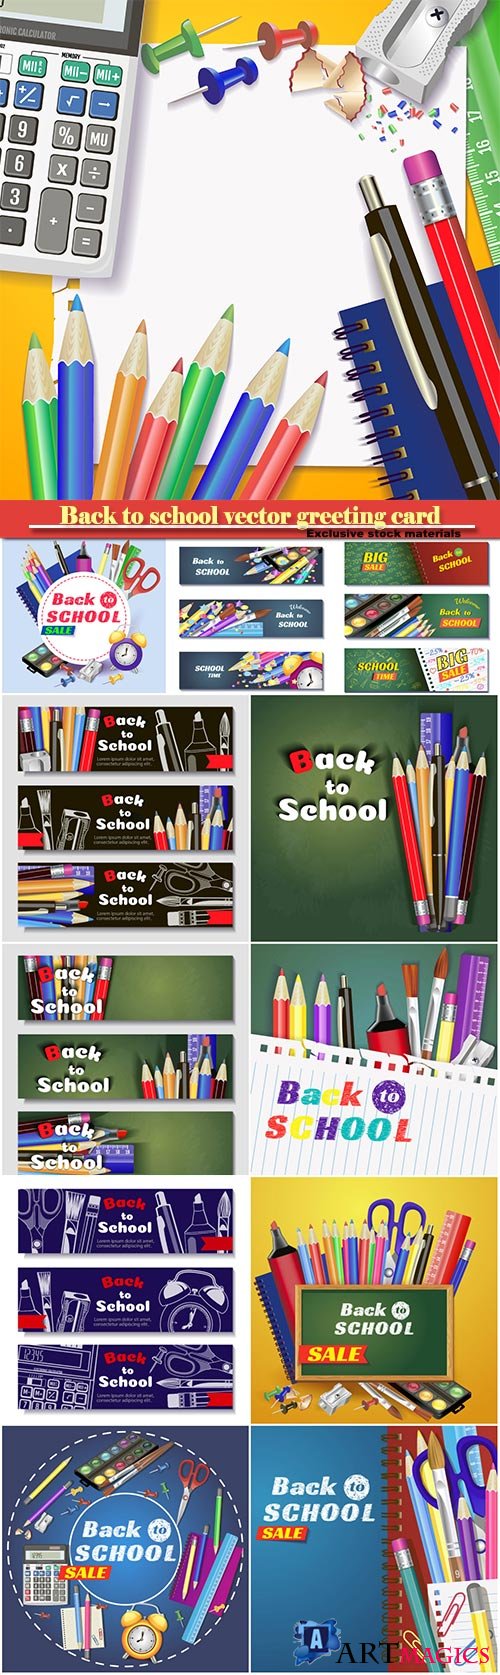 Back to school vector greeting card # 8